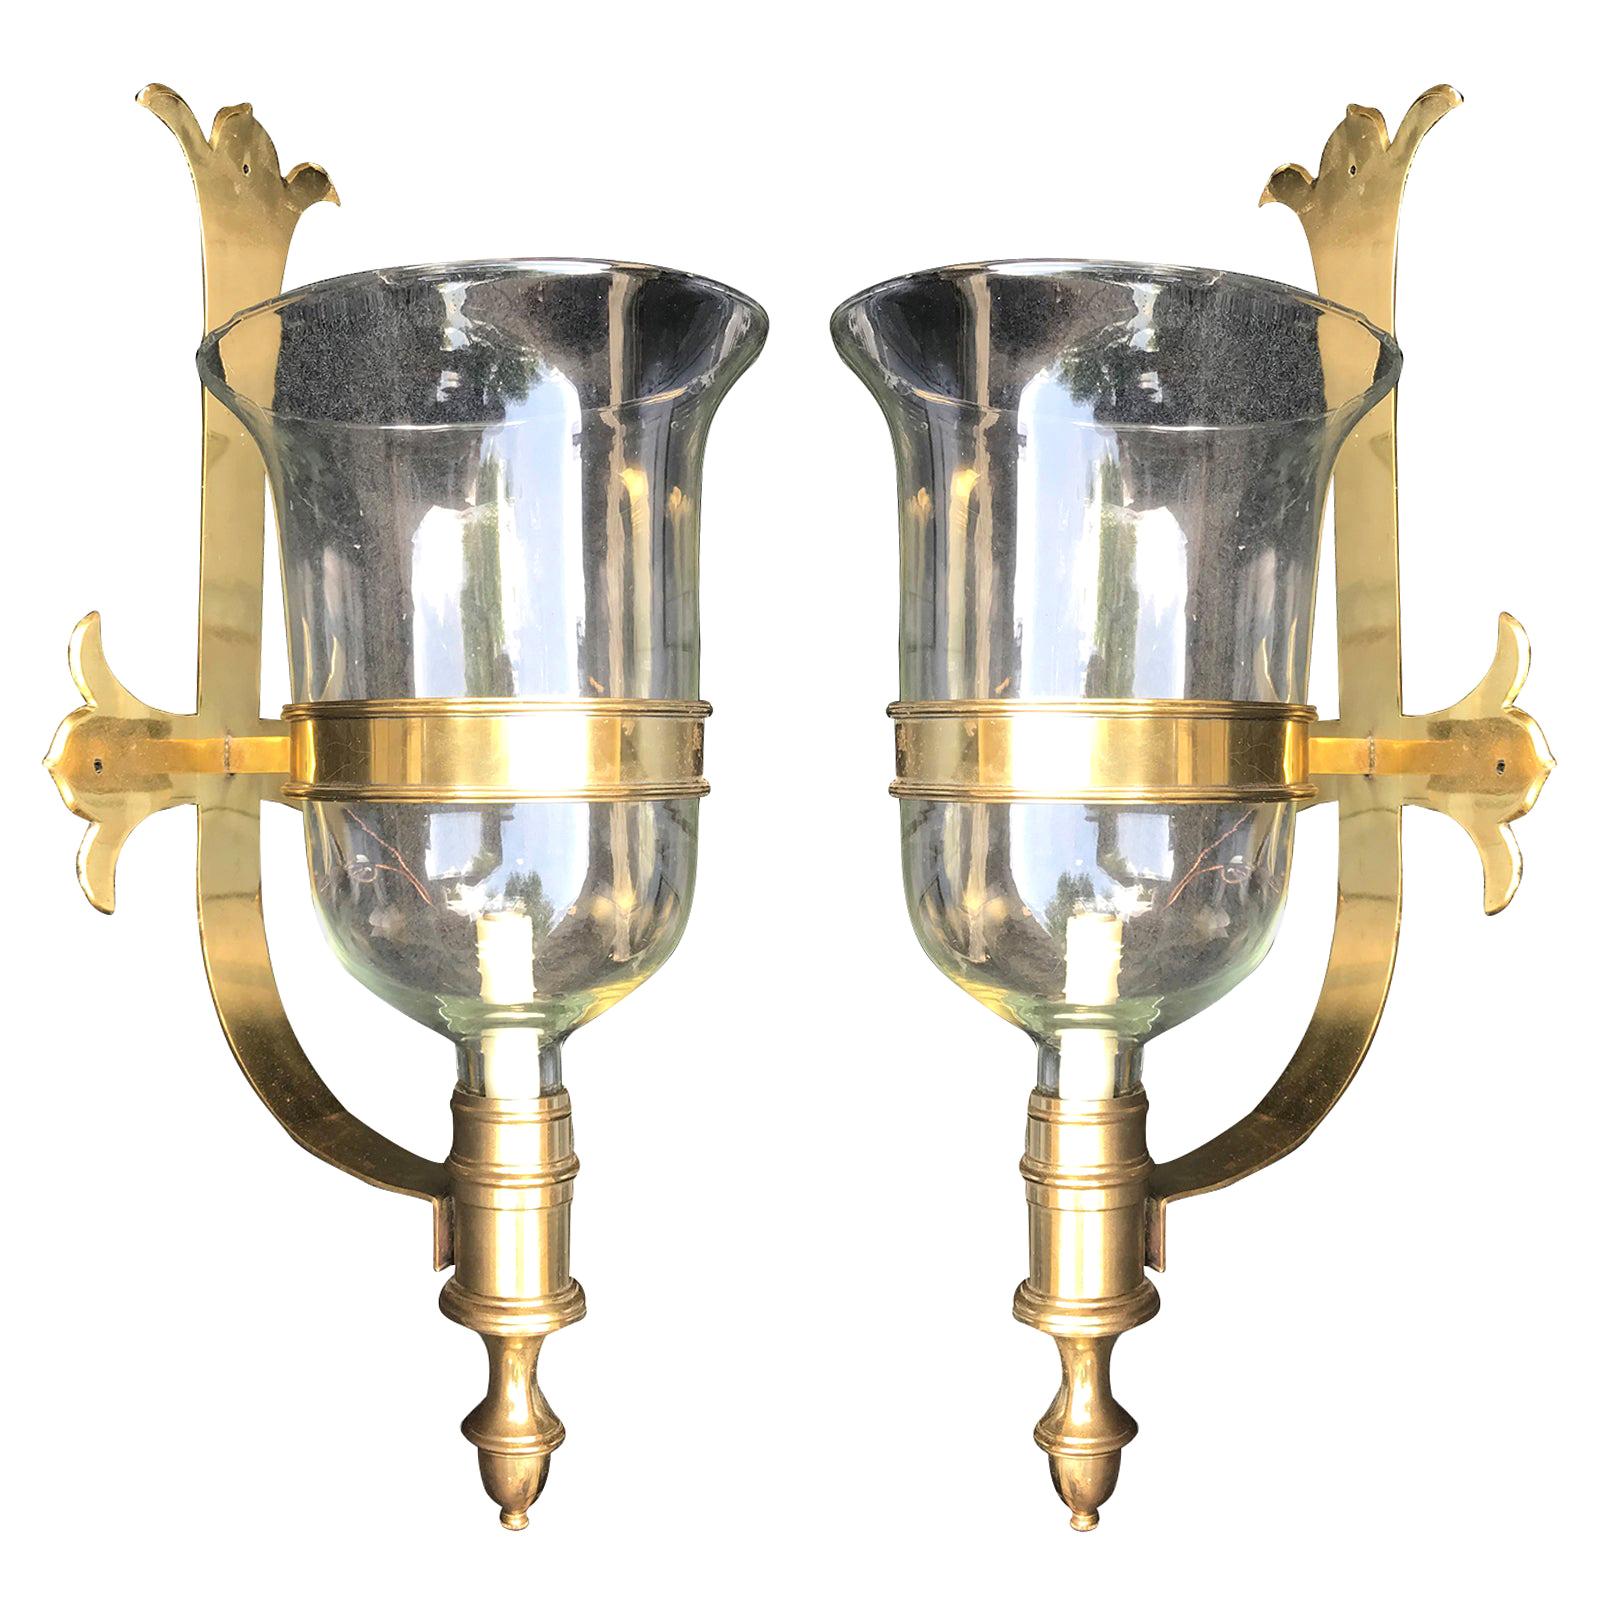 Pair of Brass and Glass Chapman Hurricane Sconces, circa 1970s